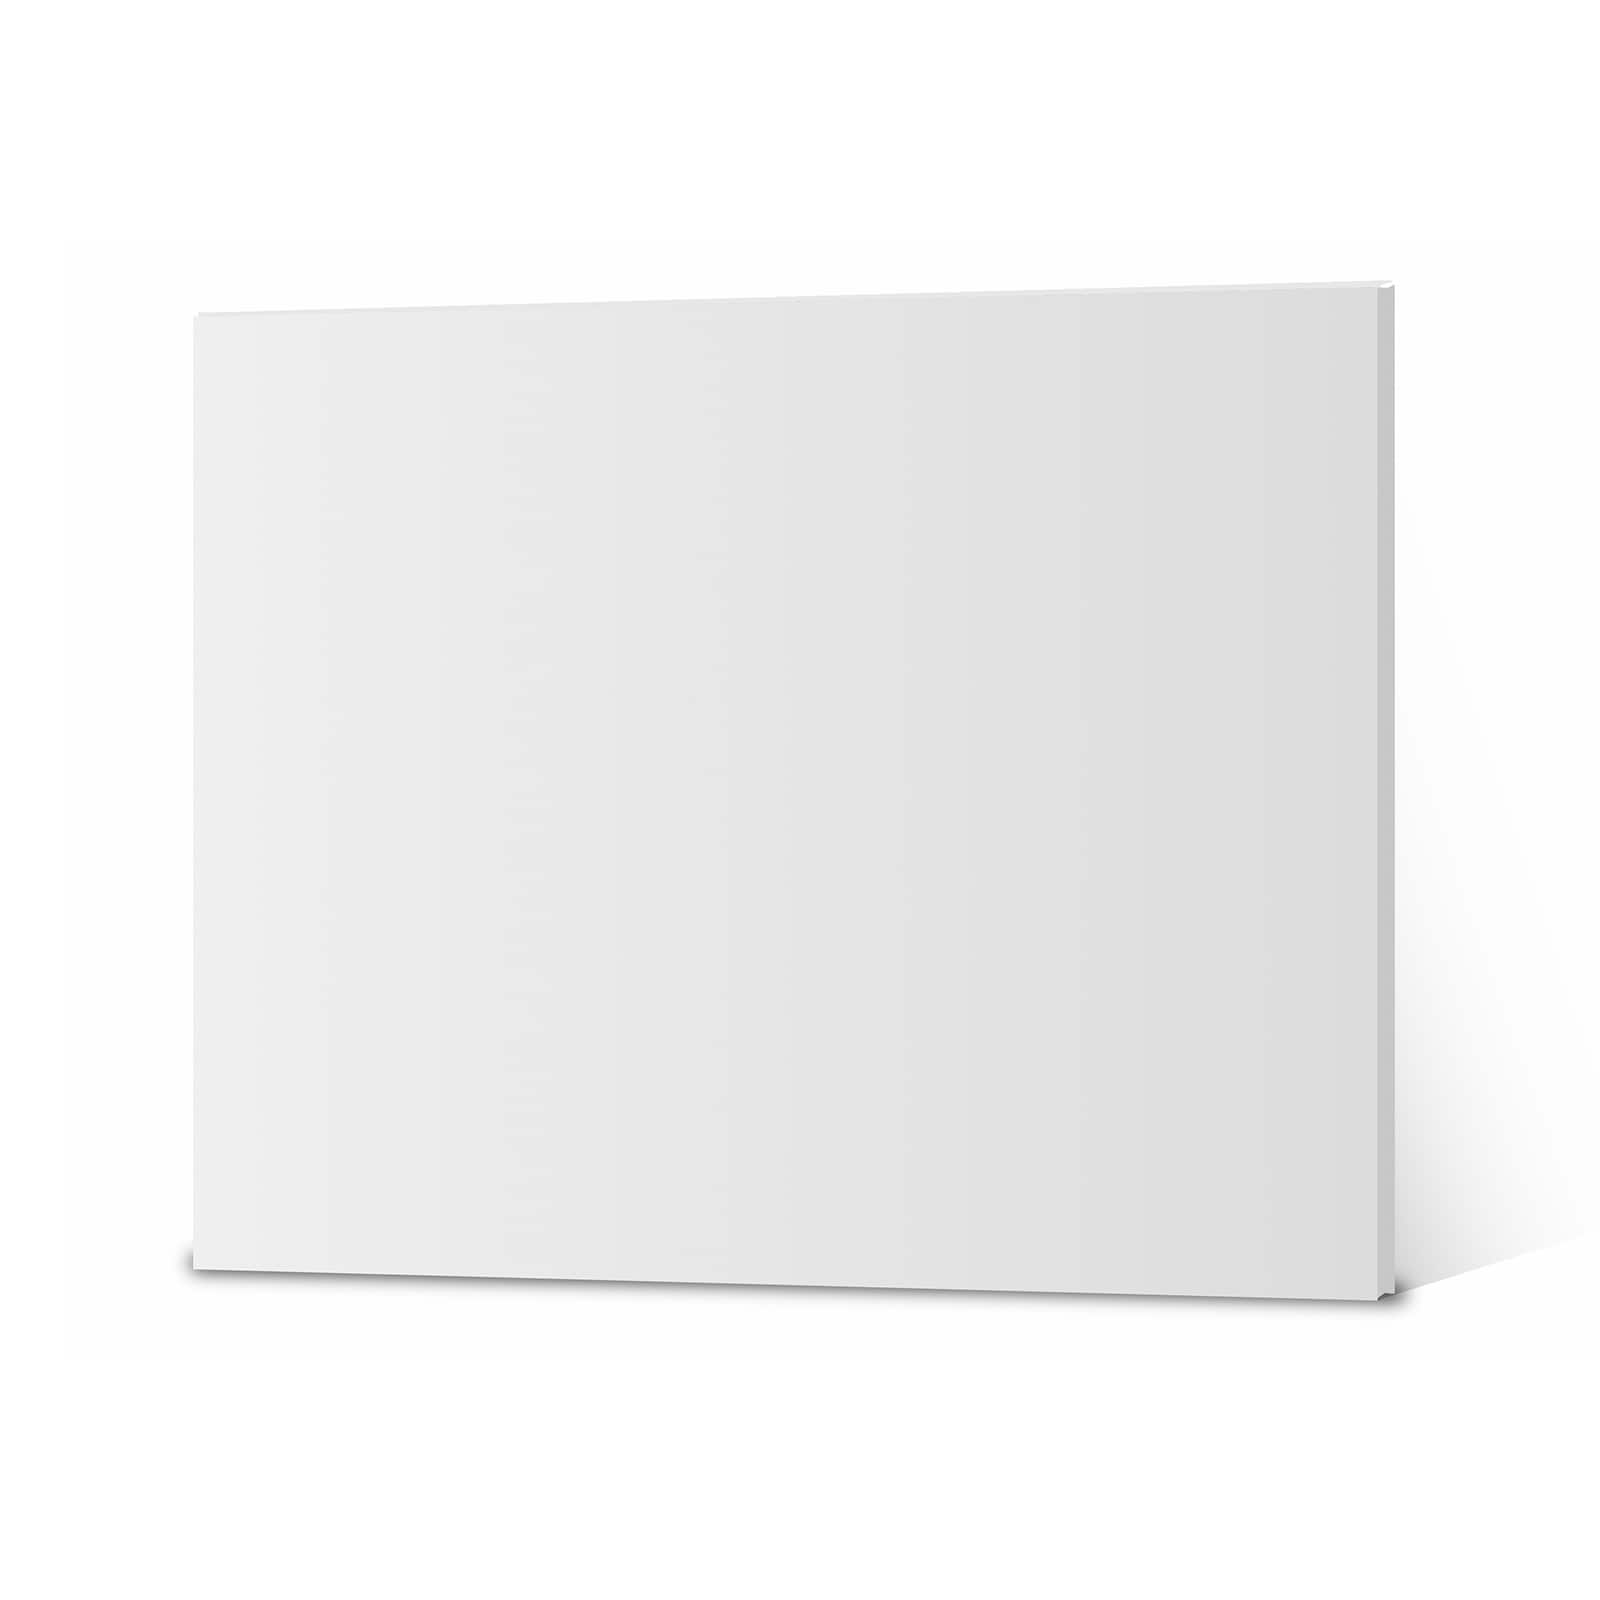 2 Count 18 x 24 Inches 3/16 Inch Thickness Elmers Foam Board Multi-Pack White 